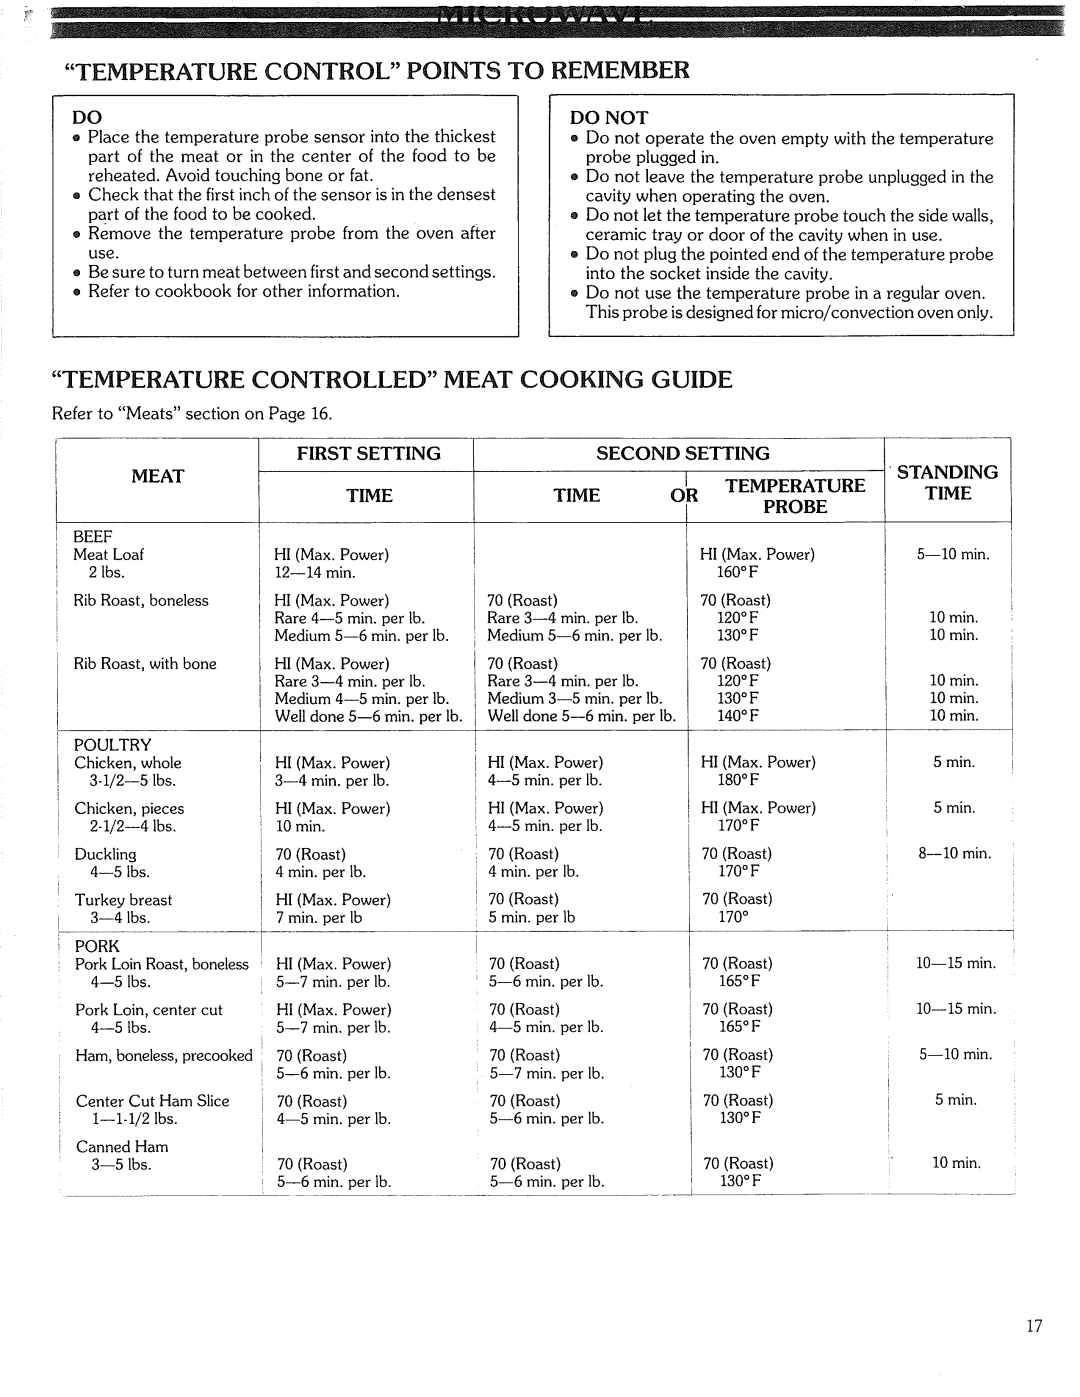 Kenmore 87561 Temperature Control Points To Remember, Temperature Controlled Meat Cooking Guide, Time, bTEMPERATURE TIMEOR 